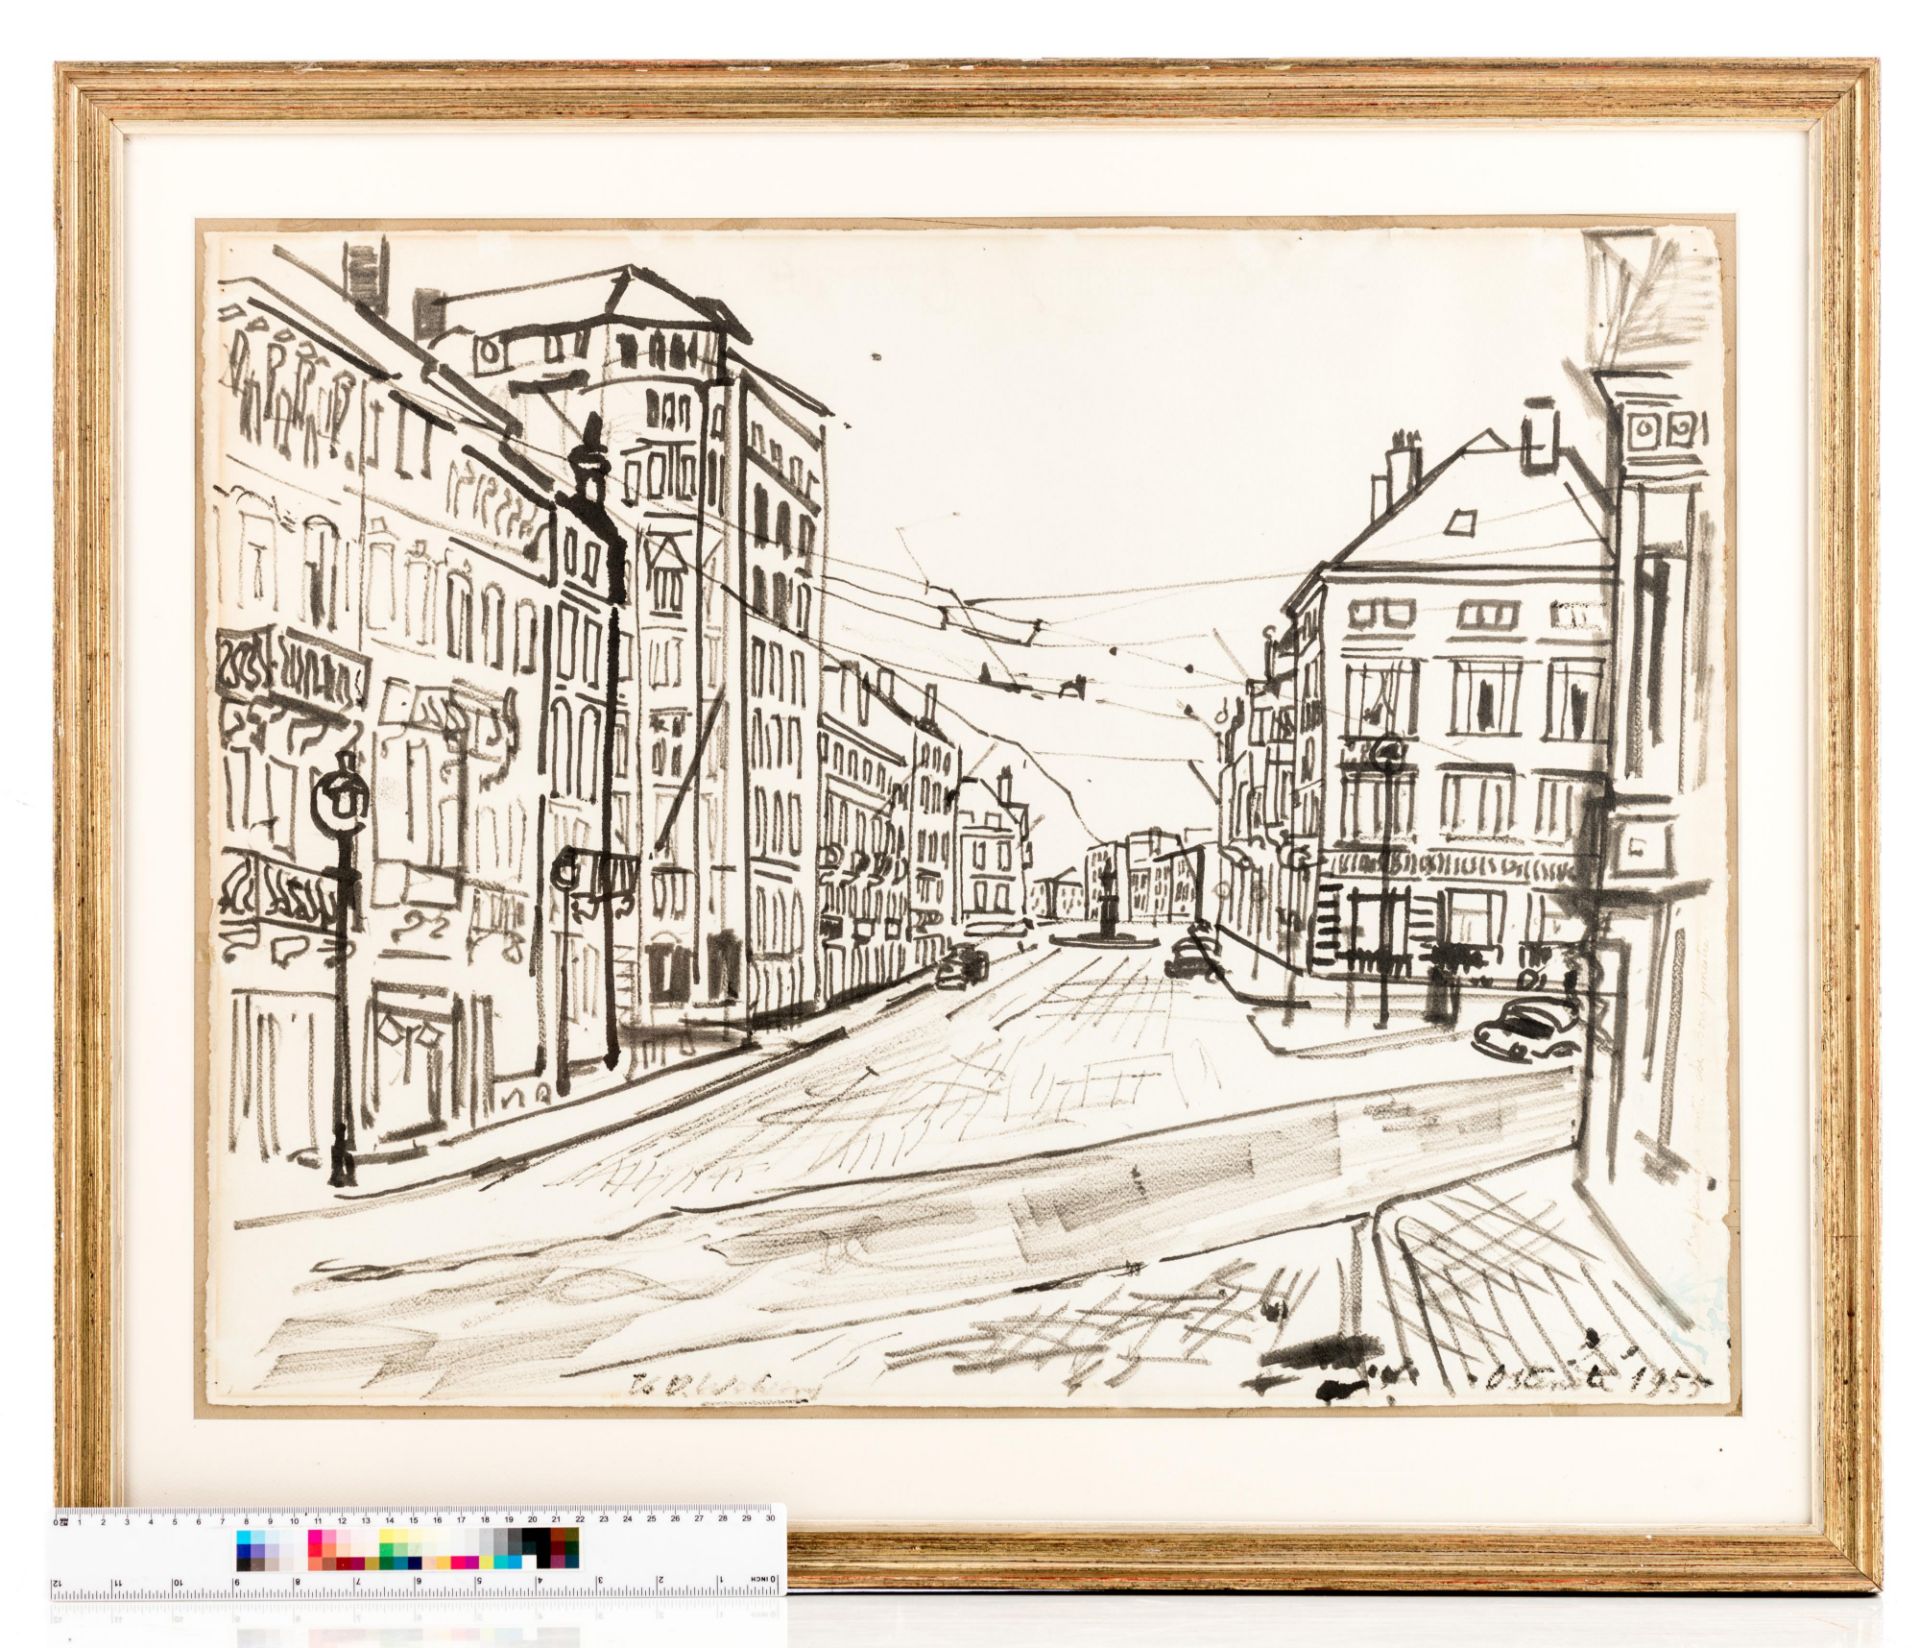 Wolvens V.H., 'Ostende', dated 1955, ink drawing on paper, 49,5 x 64 cm, Is possibly subject of the - Image 6 of 7